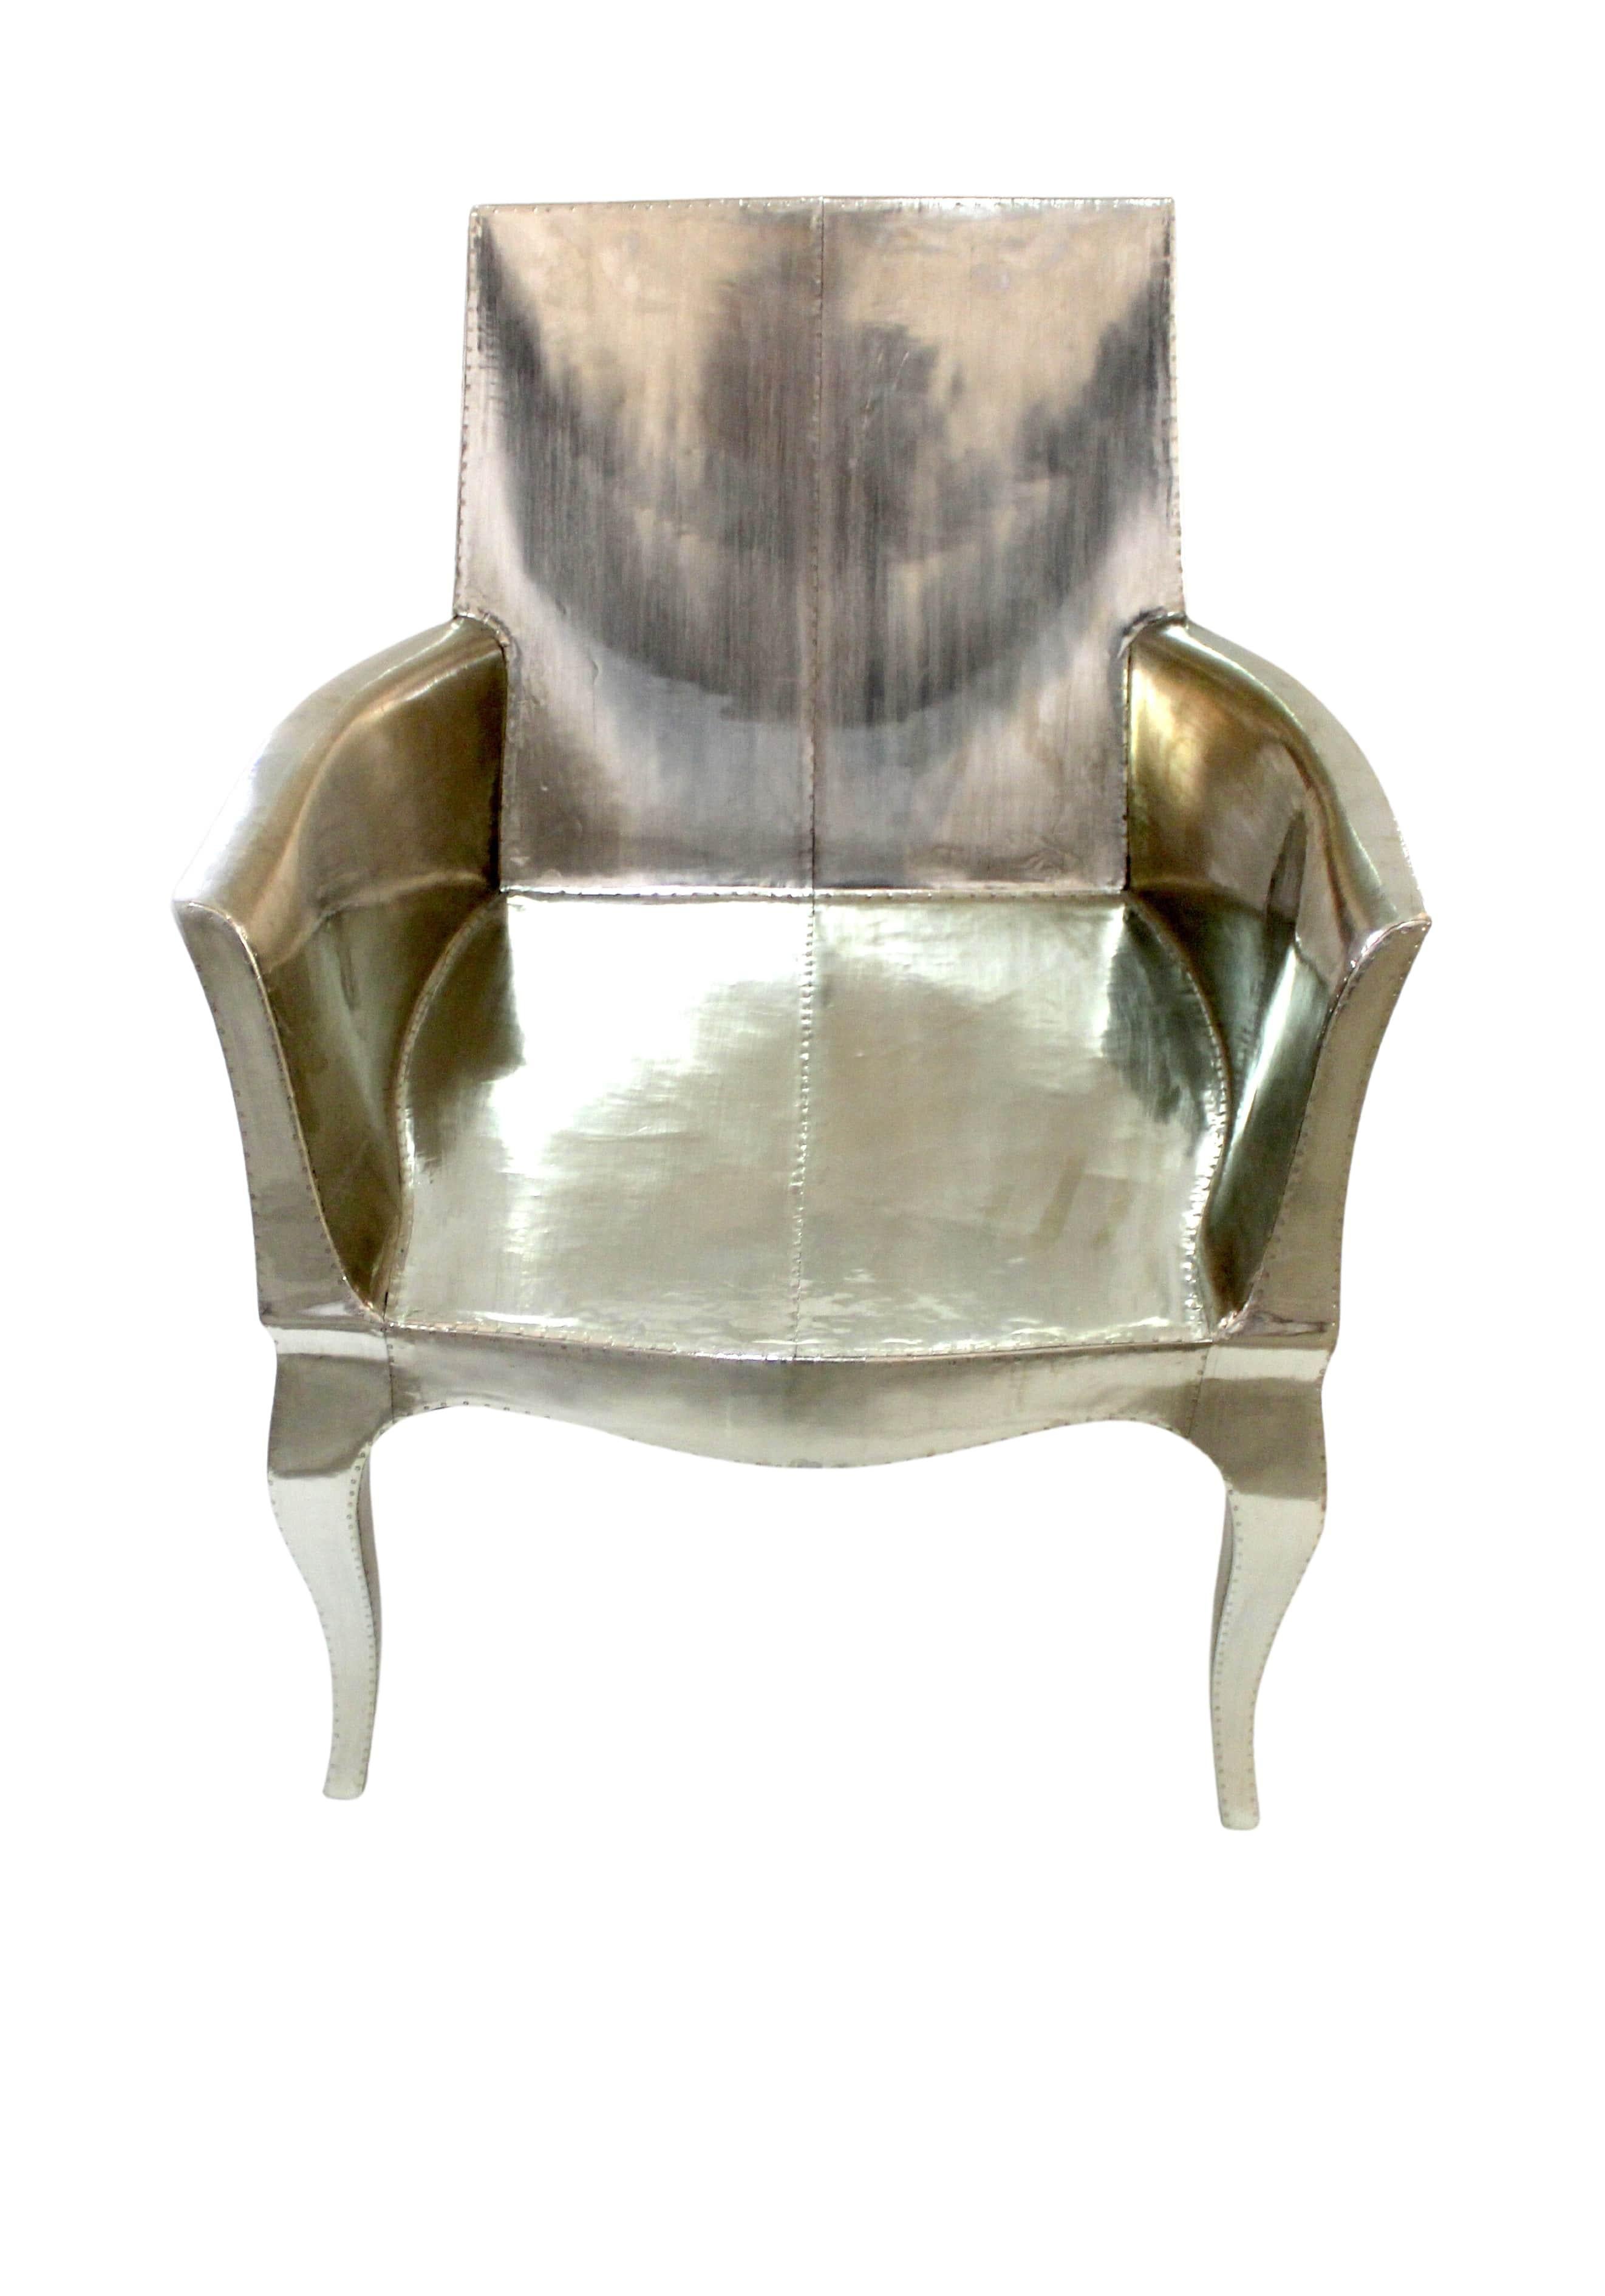 Indian Art Deco Dining Room Chairs Pair Designed by Paul Mathieu for Stephanie Odegard For Sale